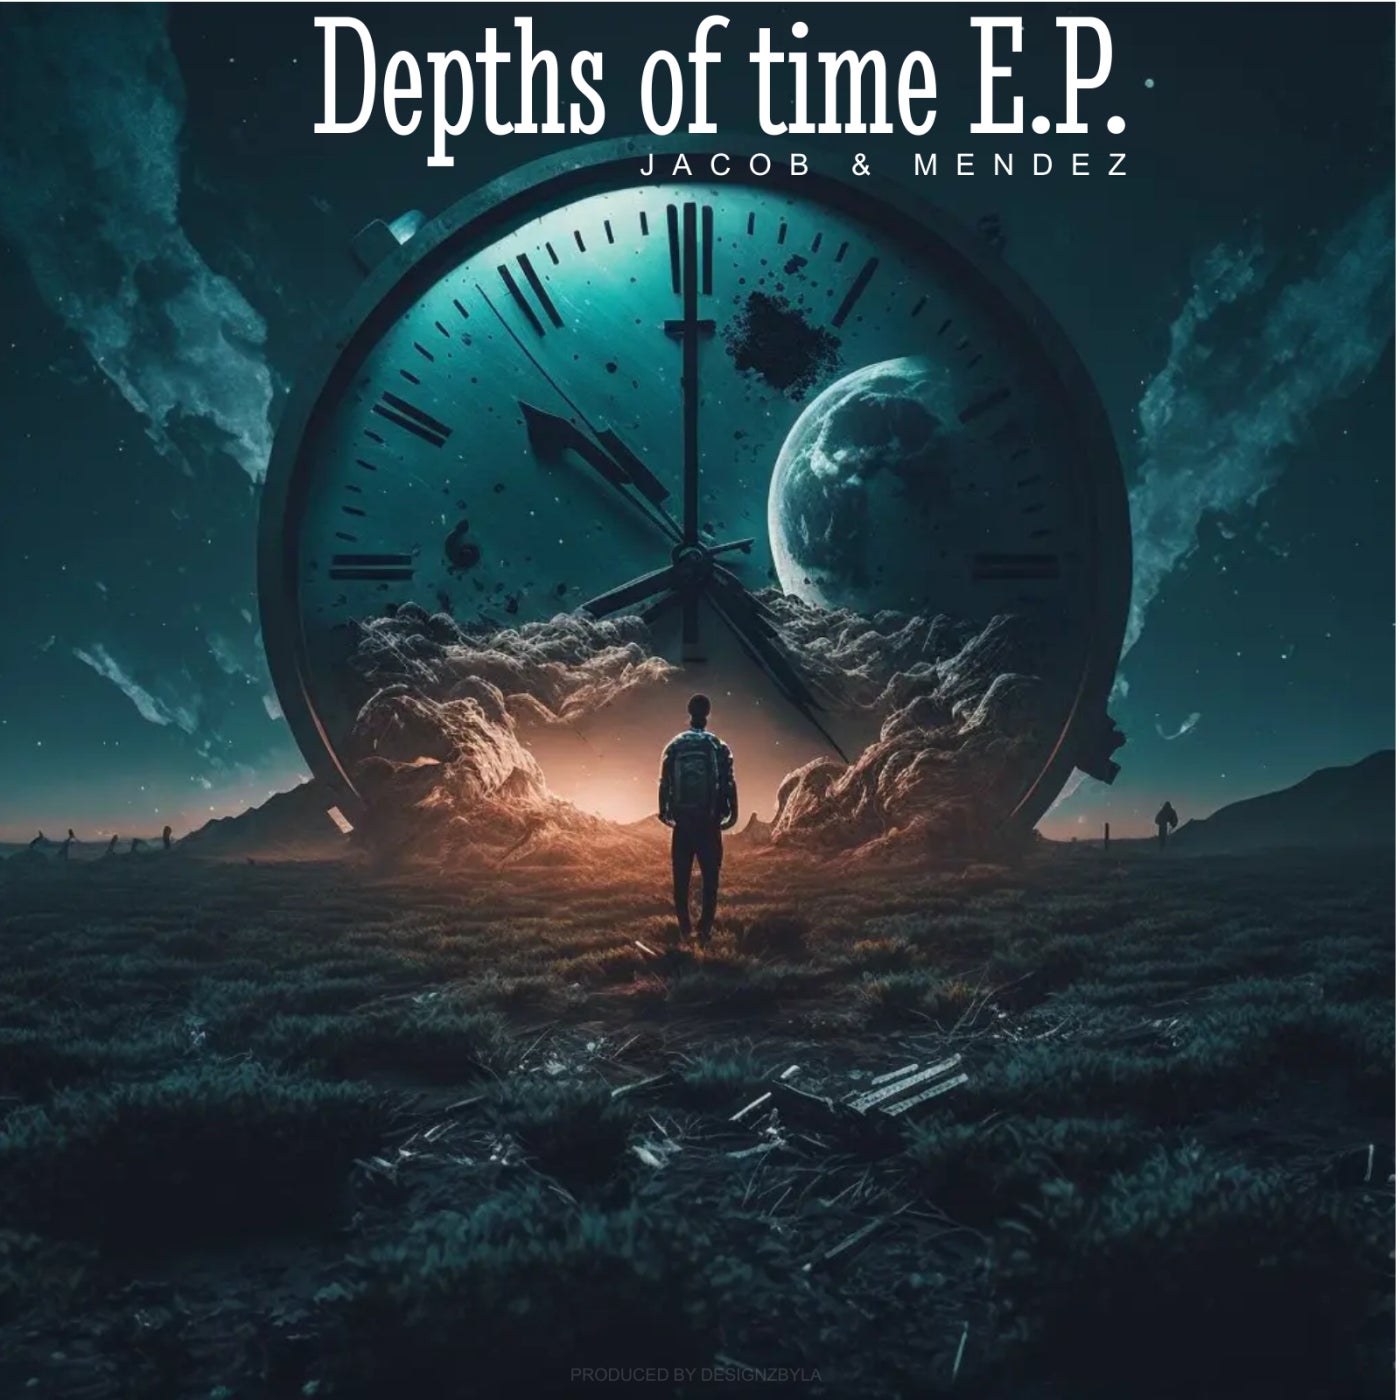 Depths of time EP